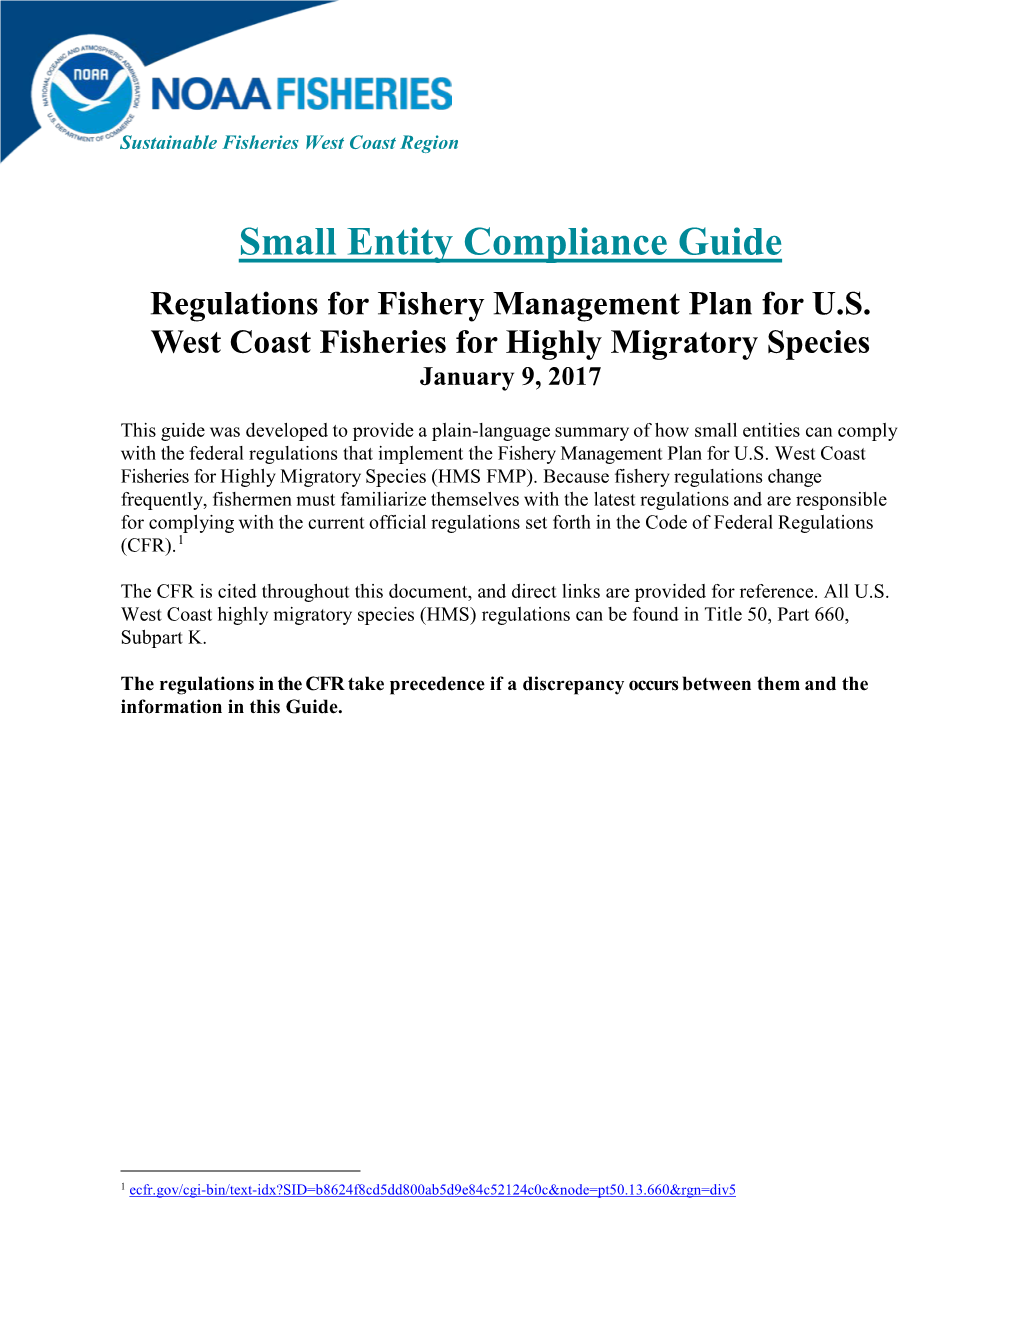 Regulations for Fishery Management Plan for US West Coast Fisheries